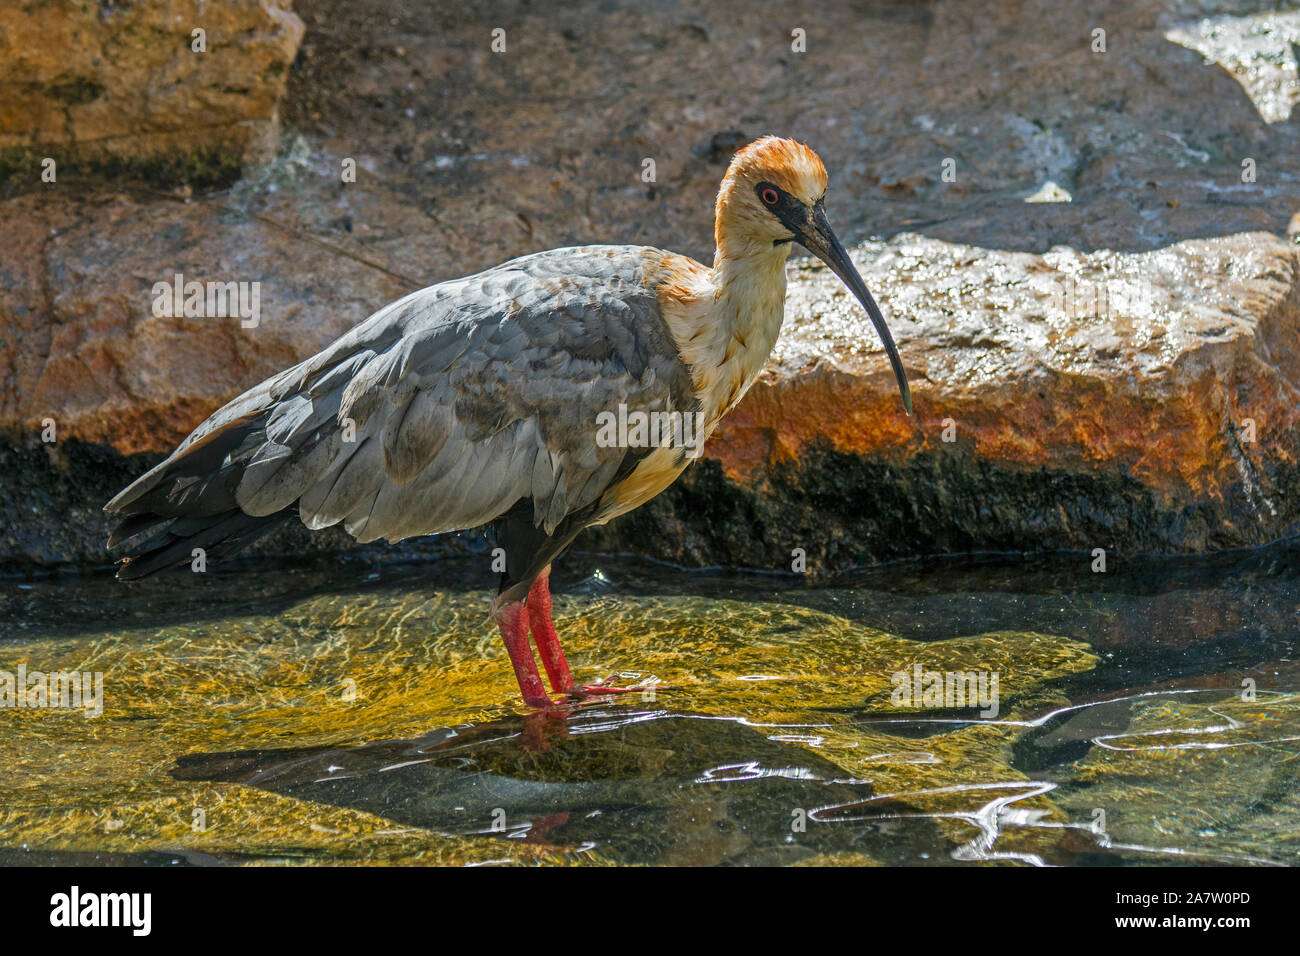 Black-faced ibis (Theristicus melanopis / Tantalus melanopis) foraging in shallow water, native to  South America Stock Photo